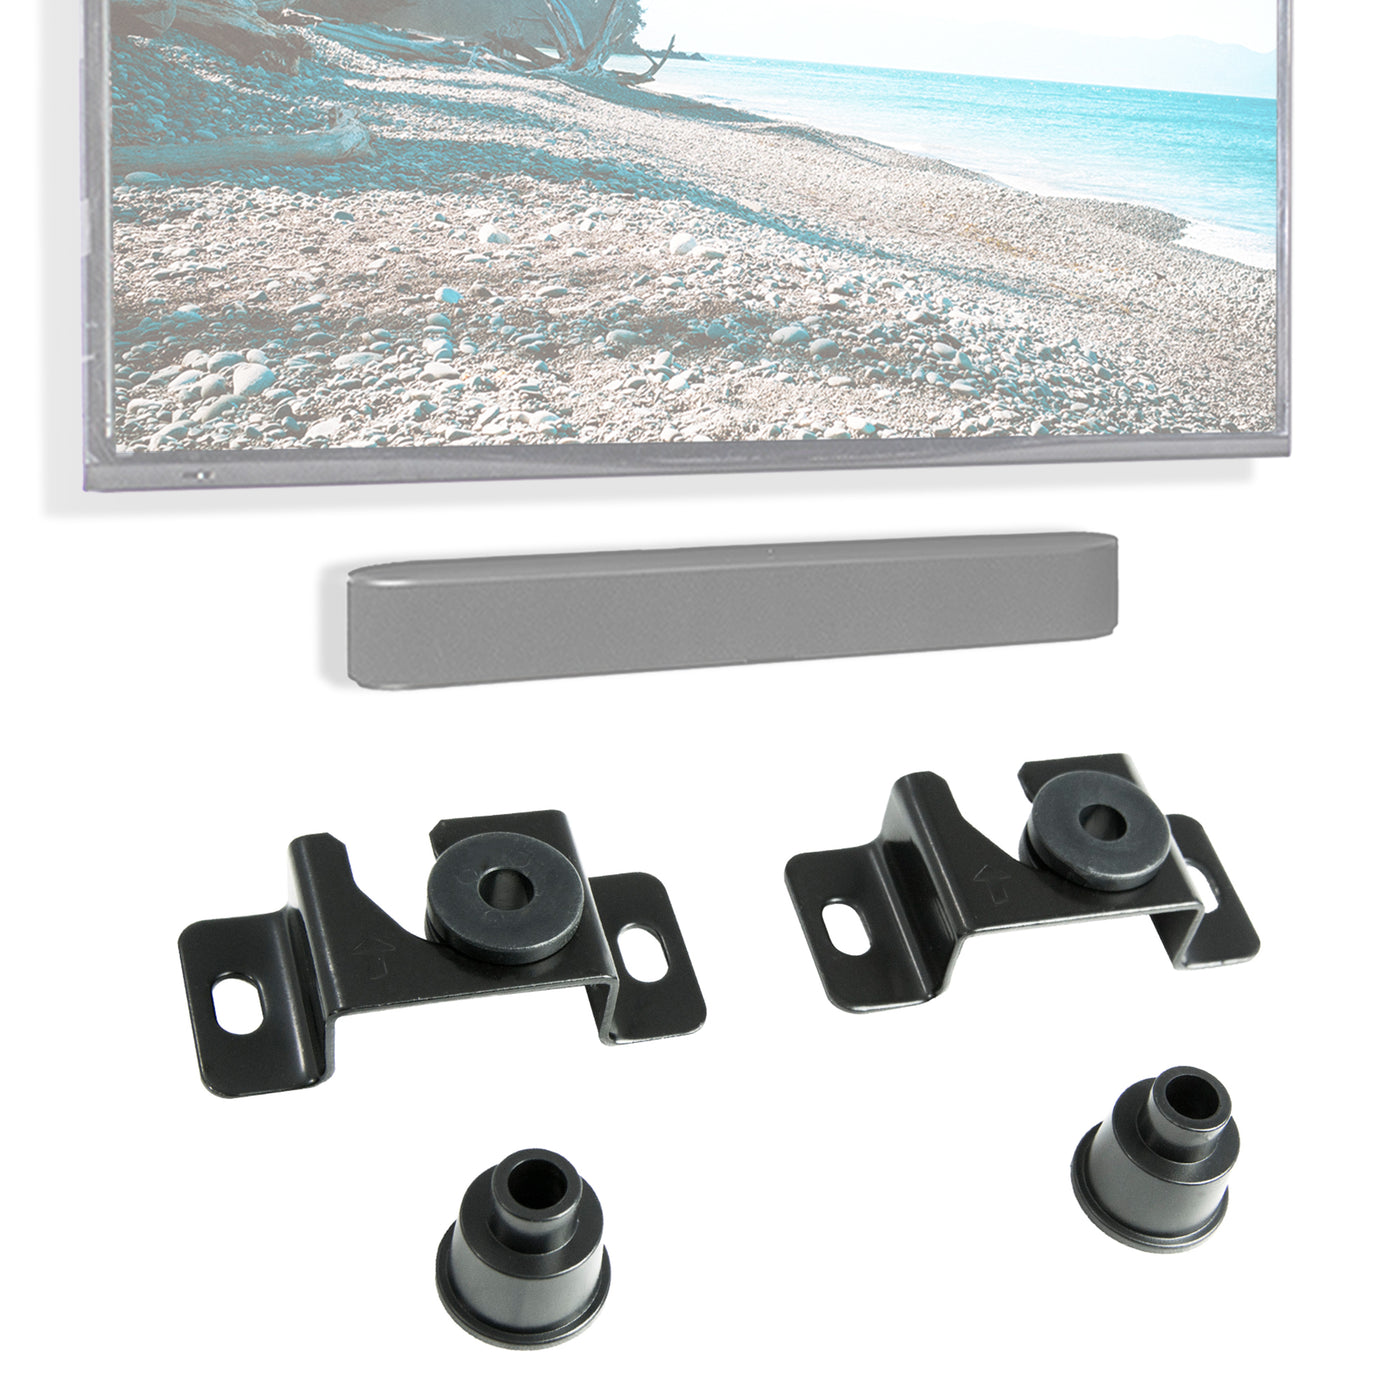 Low profile TV wall mount.